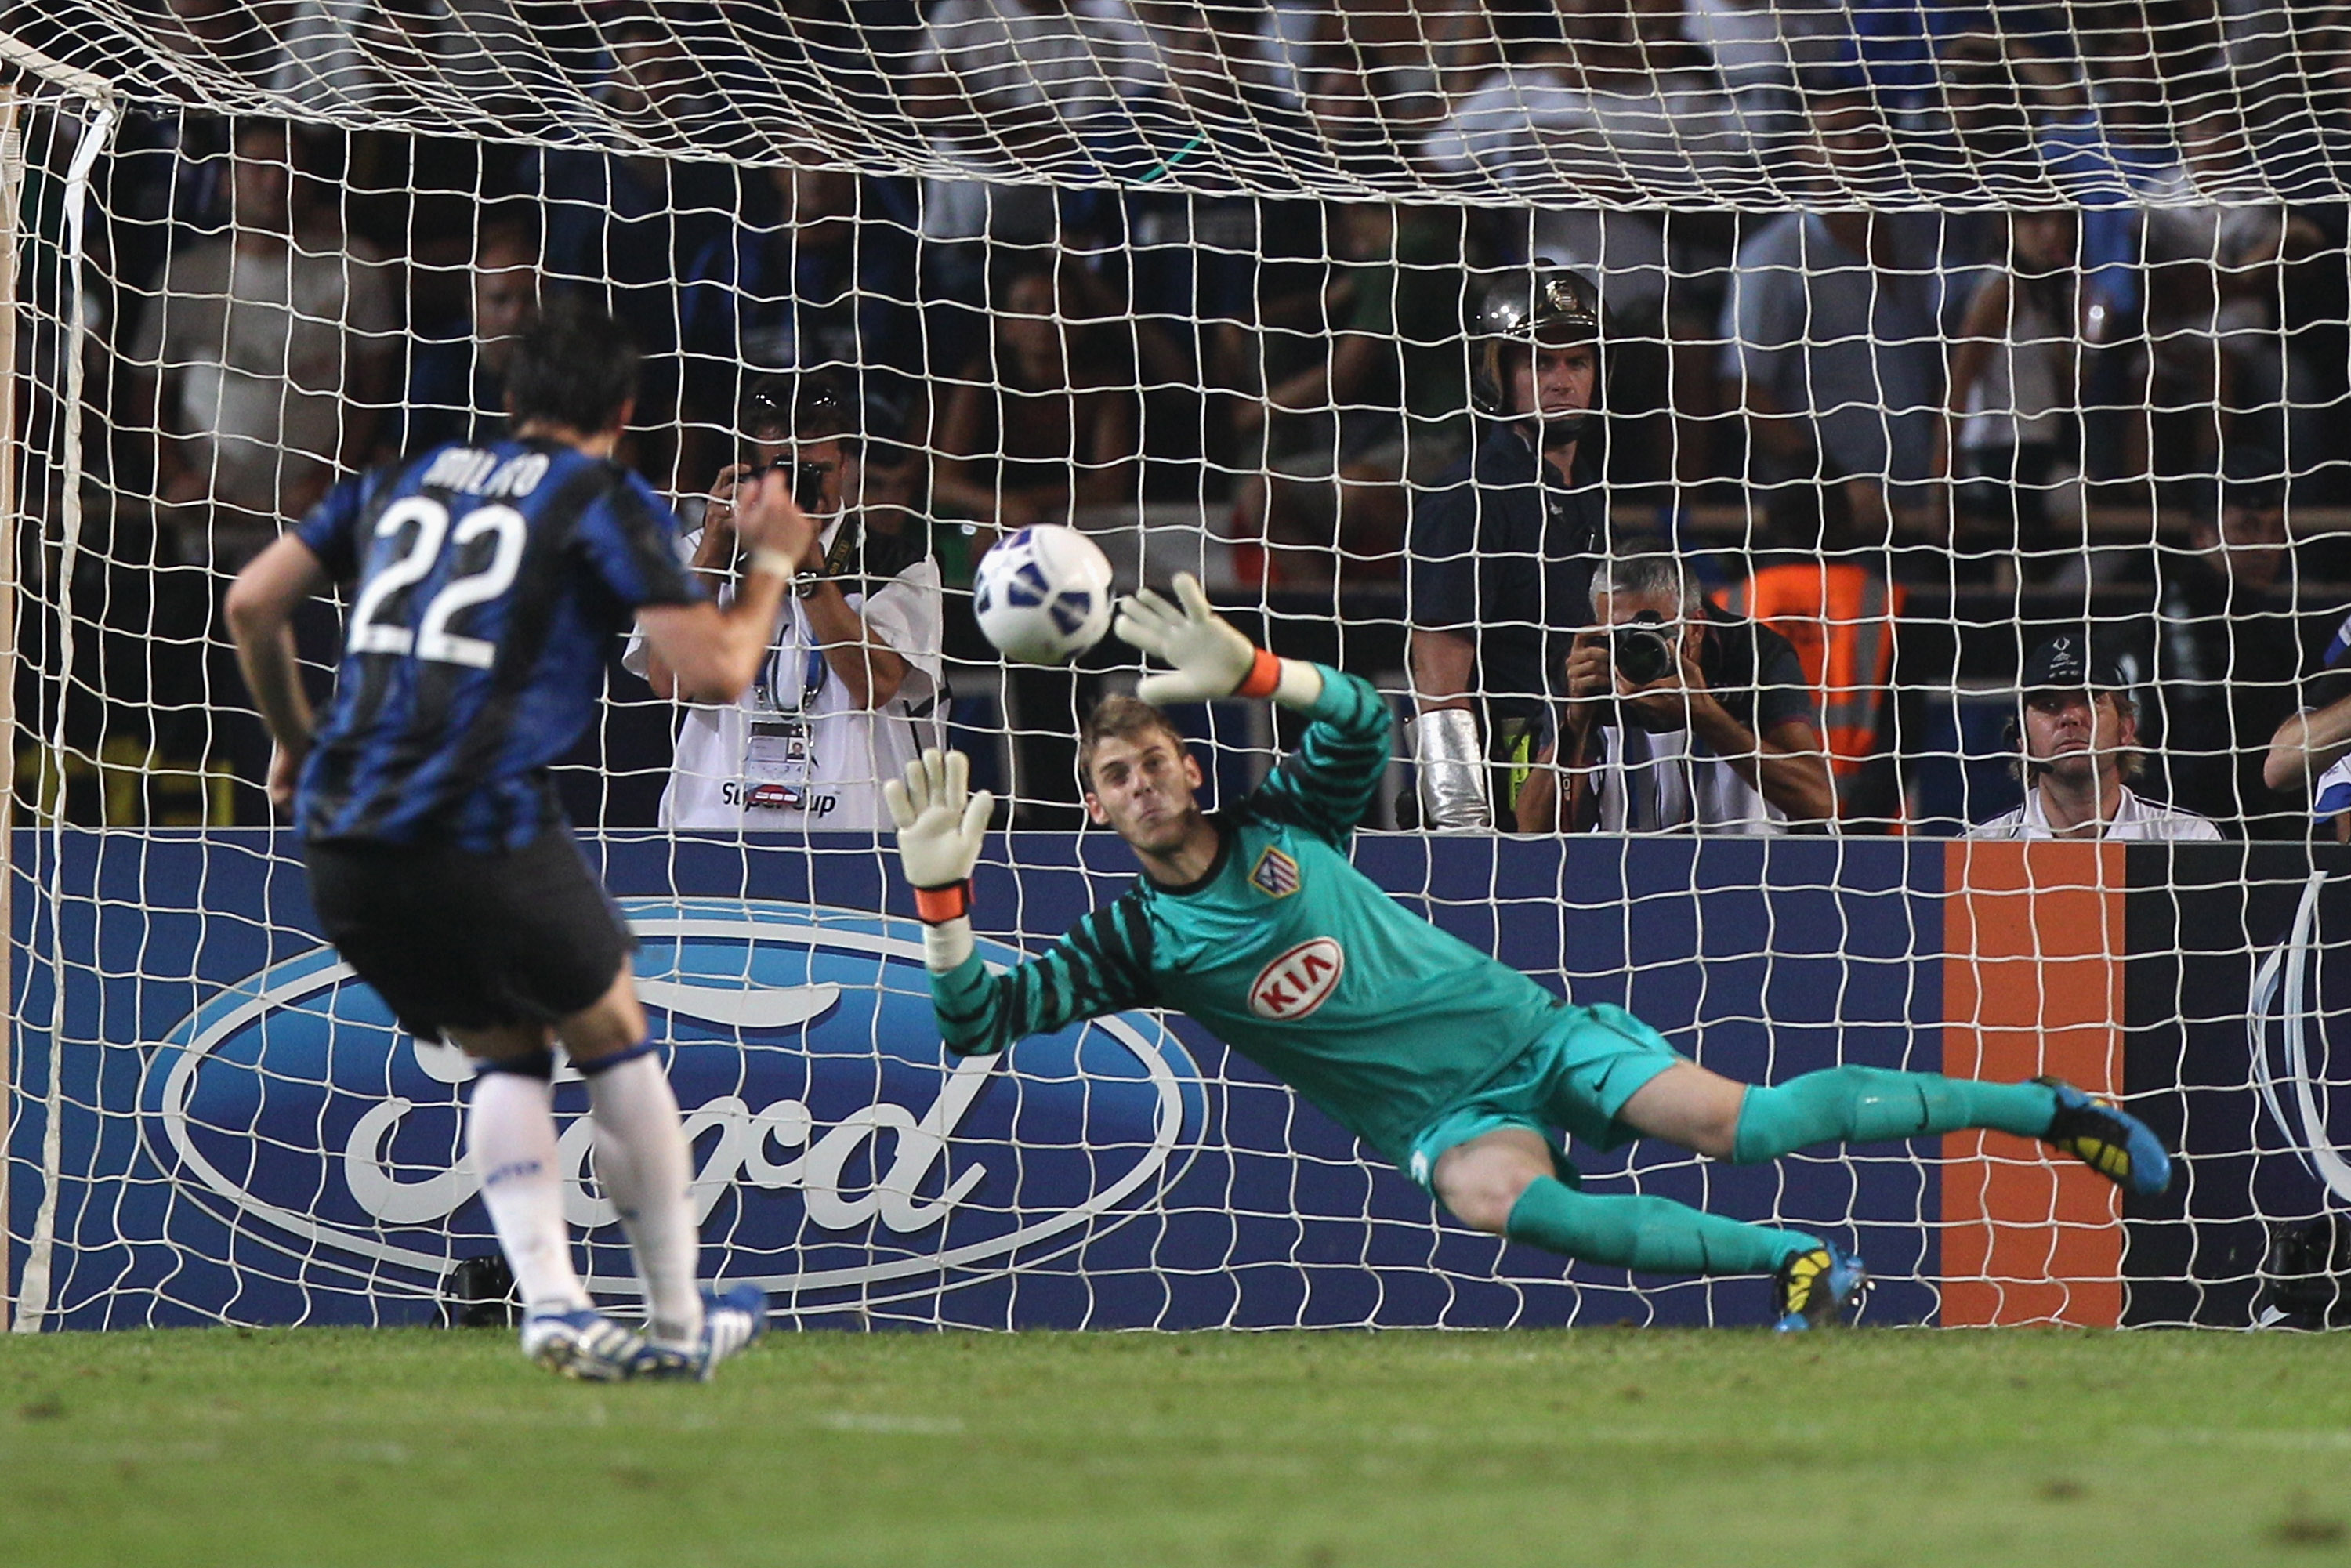 MONACO - AUGUST 27:  David de Gea of Atletico saves a penalty from Diego Milito of Inter during the UEFA Super Cup match between Inter Milan and Atletico Madrid at Louis II Stadium on August 27, 2010 in Monaco, Monaco.  (Photo by Michael Steele/Getty Imag